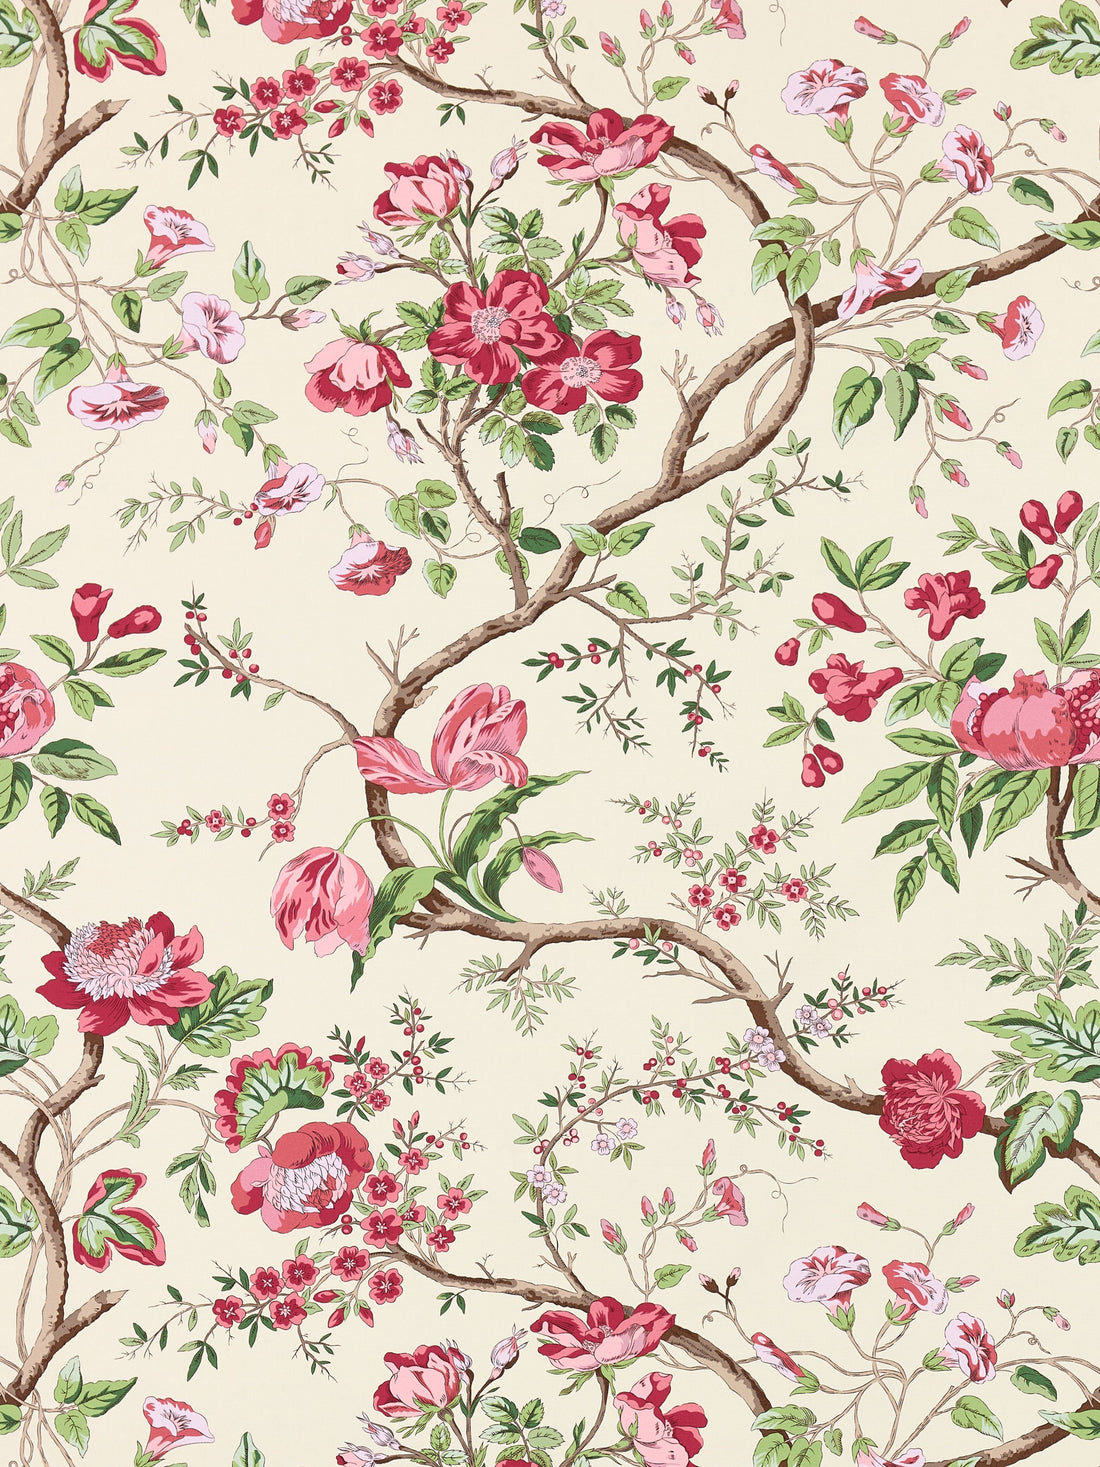 Persephone Print fabric in heirloom rose color - pattern number SC 000216651 - by Scalamandre in the Scalamandre Fabrics Book 1 collection